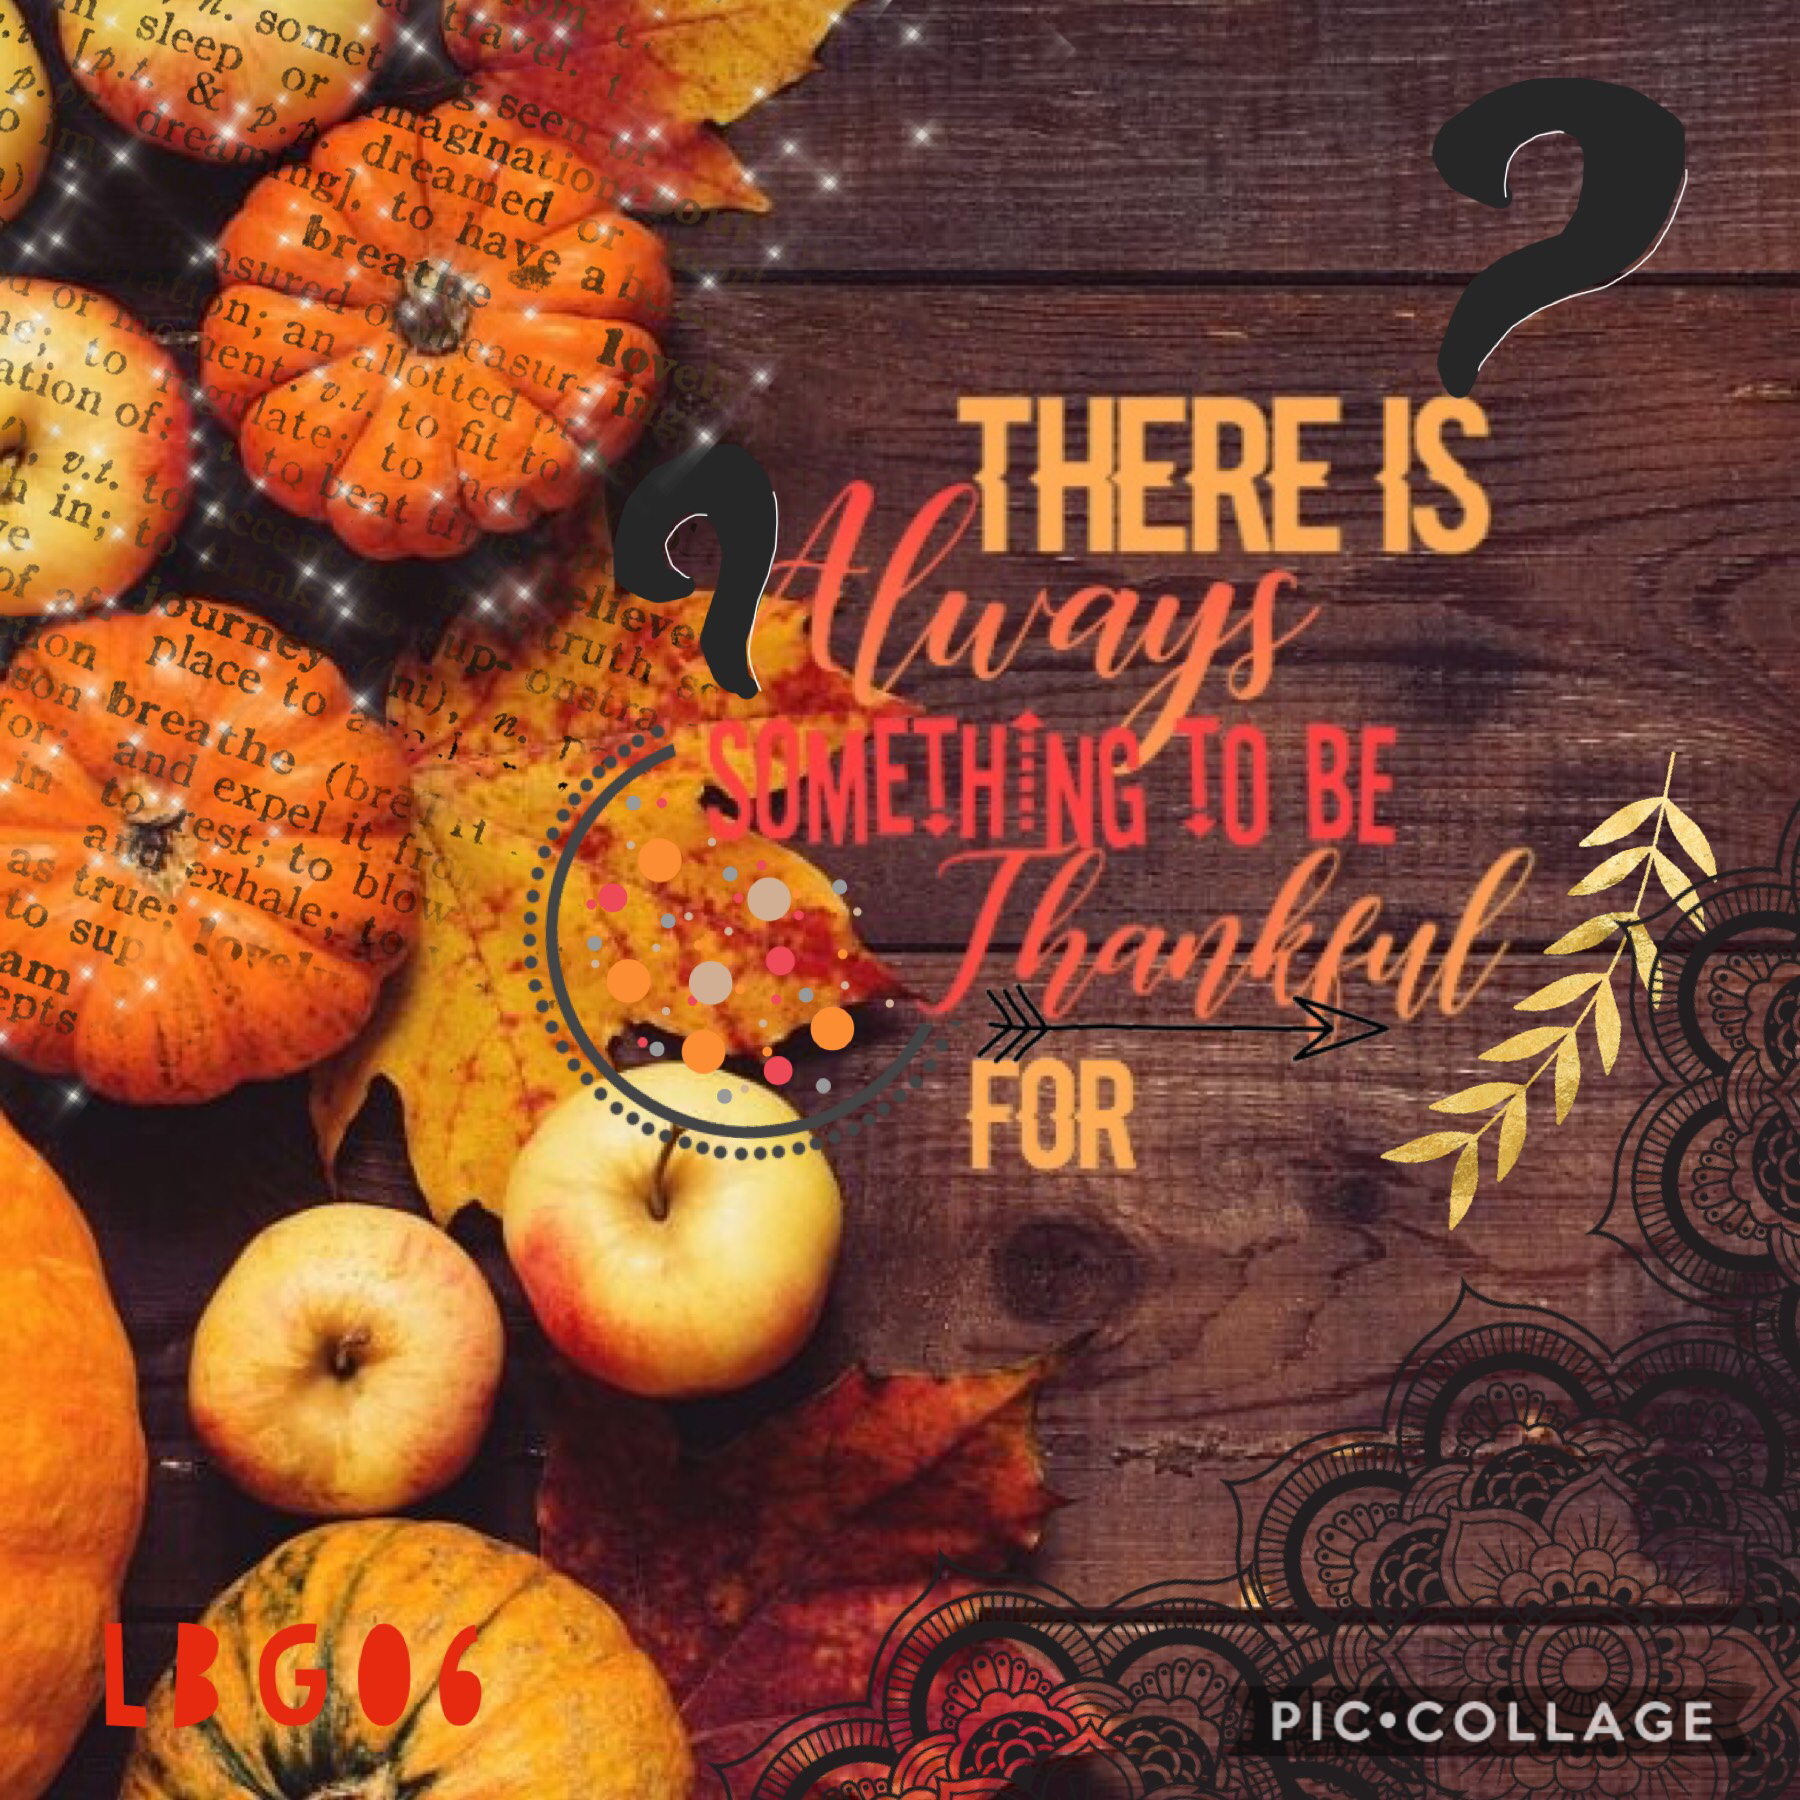 🥧tapppp🦃

HAPPY THANKSGIVING!!!!<🦃🥧❤️

QOTD: what’s your favorite kind of pie?
AOTD: CHOCOLATE CREAM!!!! 🥧

🦃gobble gobble🦃
💛XOXO🧡